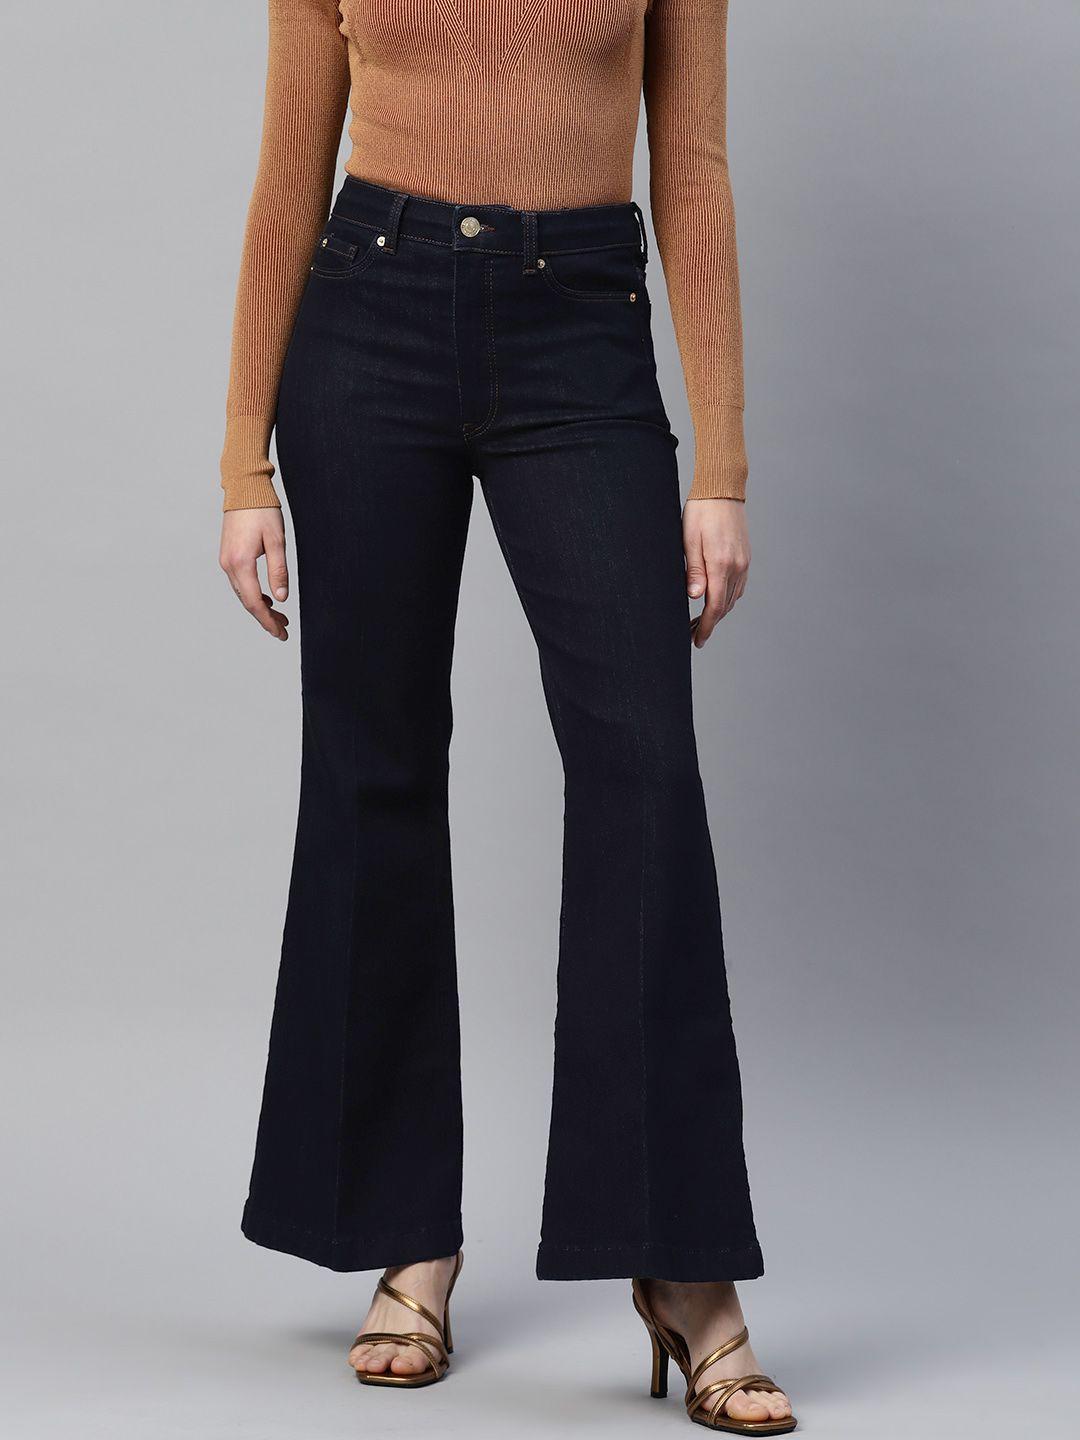 marks & spencer women flared high-rise stretchable jeans